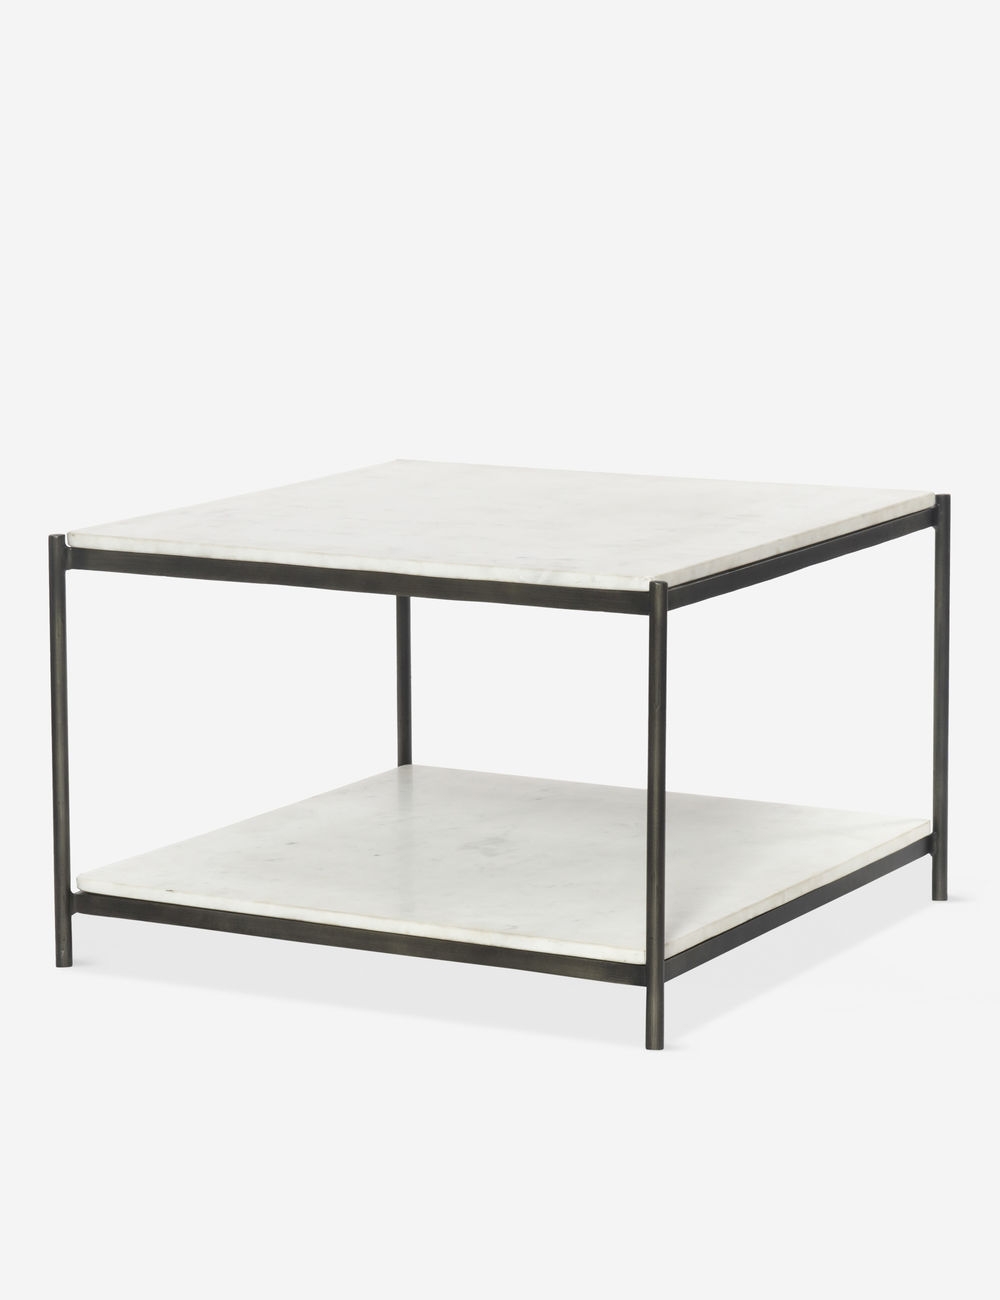 AMORICA BUNCHING TABLE, HAMMERED GREY - Image 1